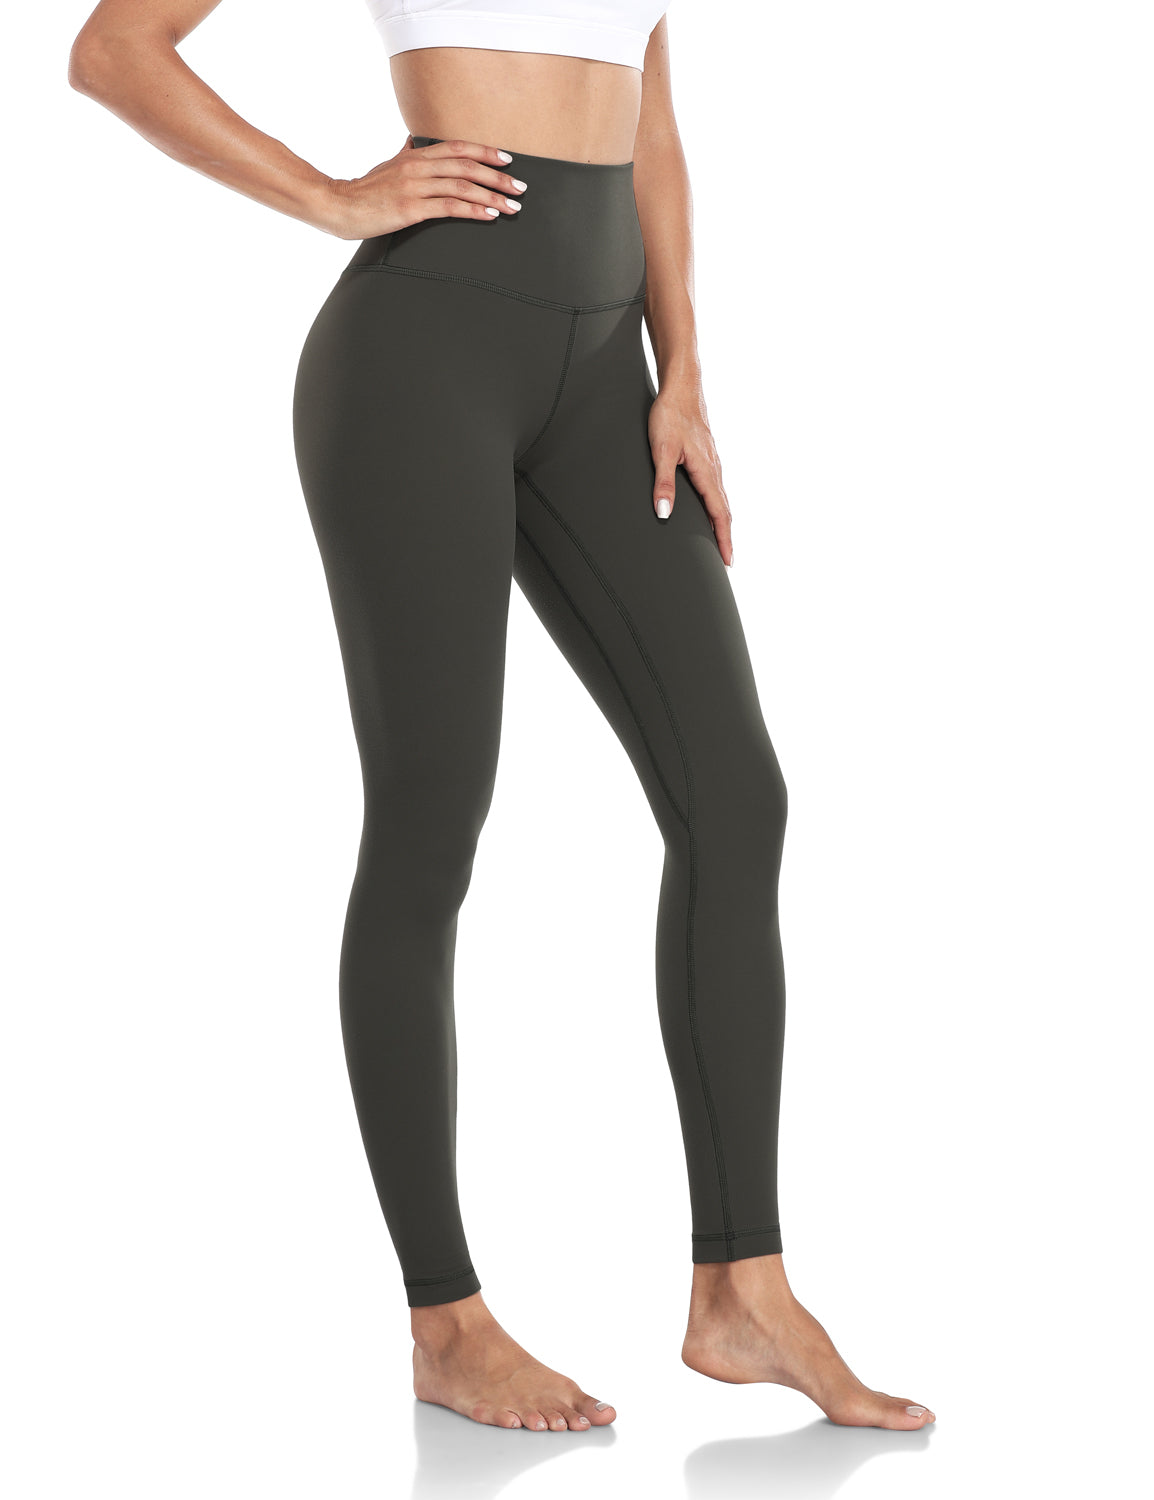 HeyNuts Essential High Waisted Yoga Leggings For Tall Women, Buttery Soft  Full Length Workout Pants 28 Black M